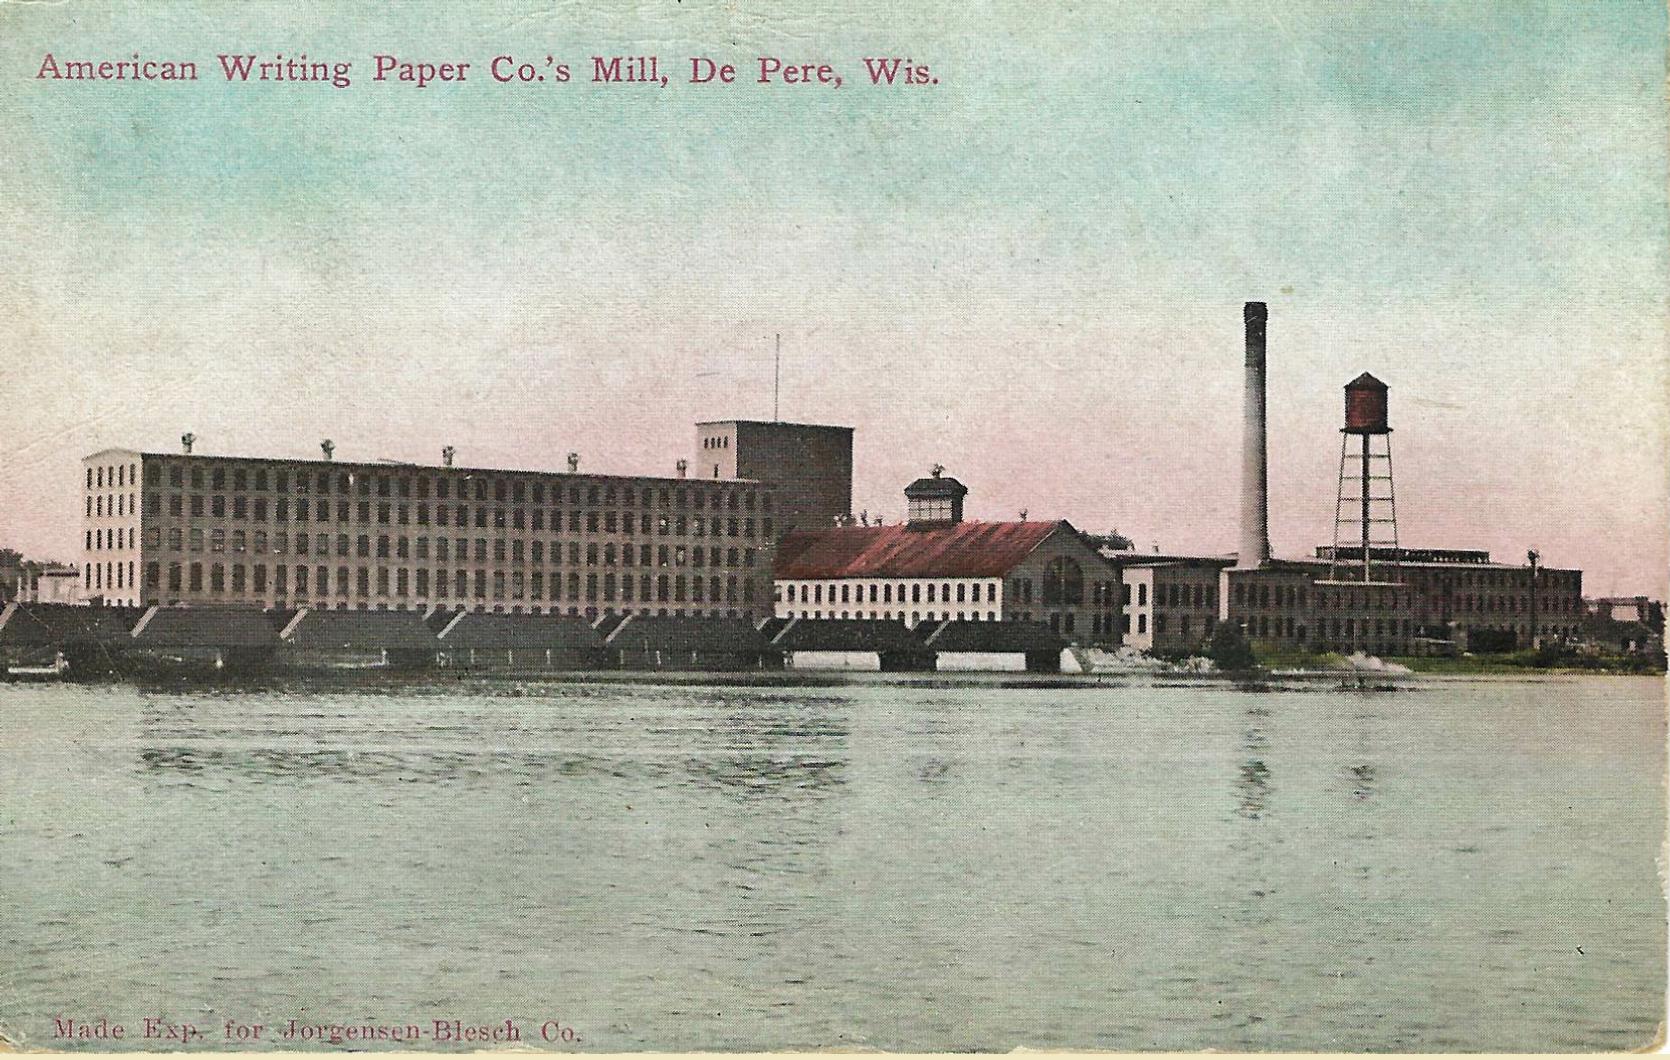 1911 - American Writing Paper Co.